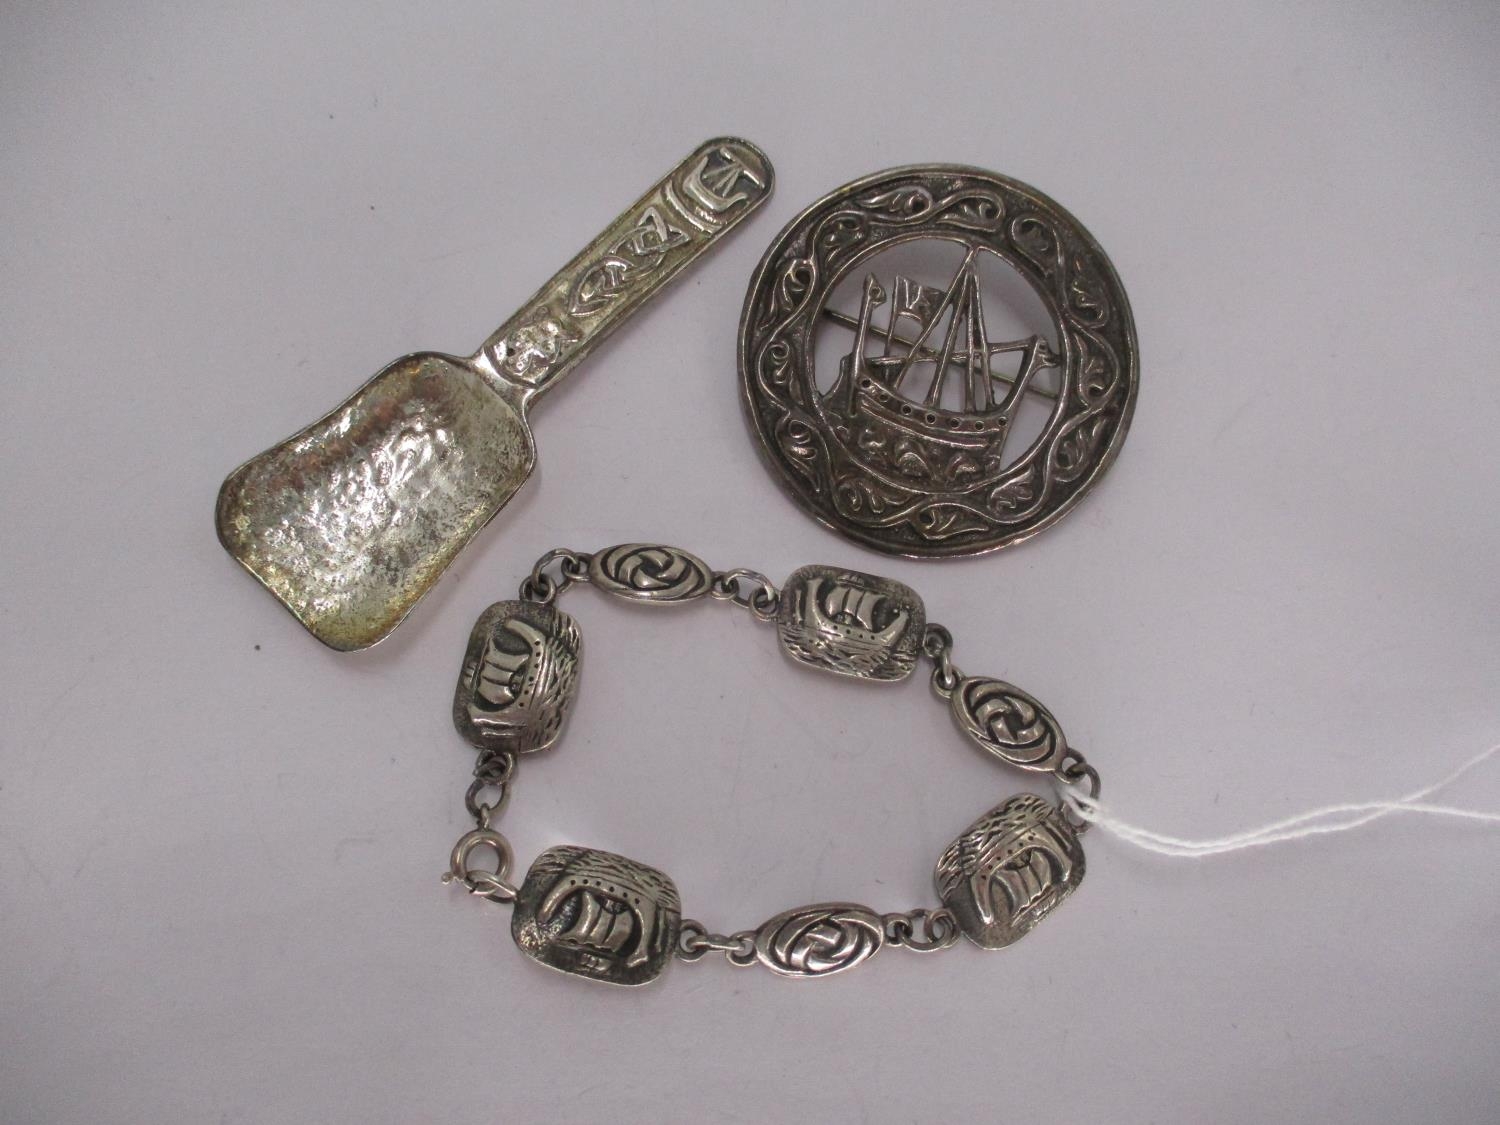 Two Iona Pattern Silver Items - a Brooch with Pierced Galleon, a Bracelet, along with a Silver